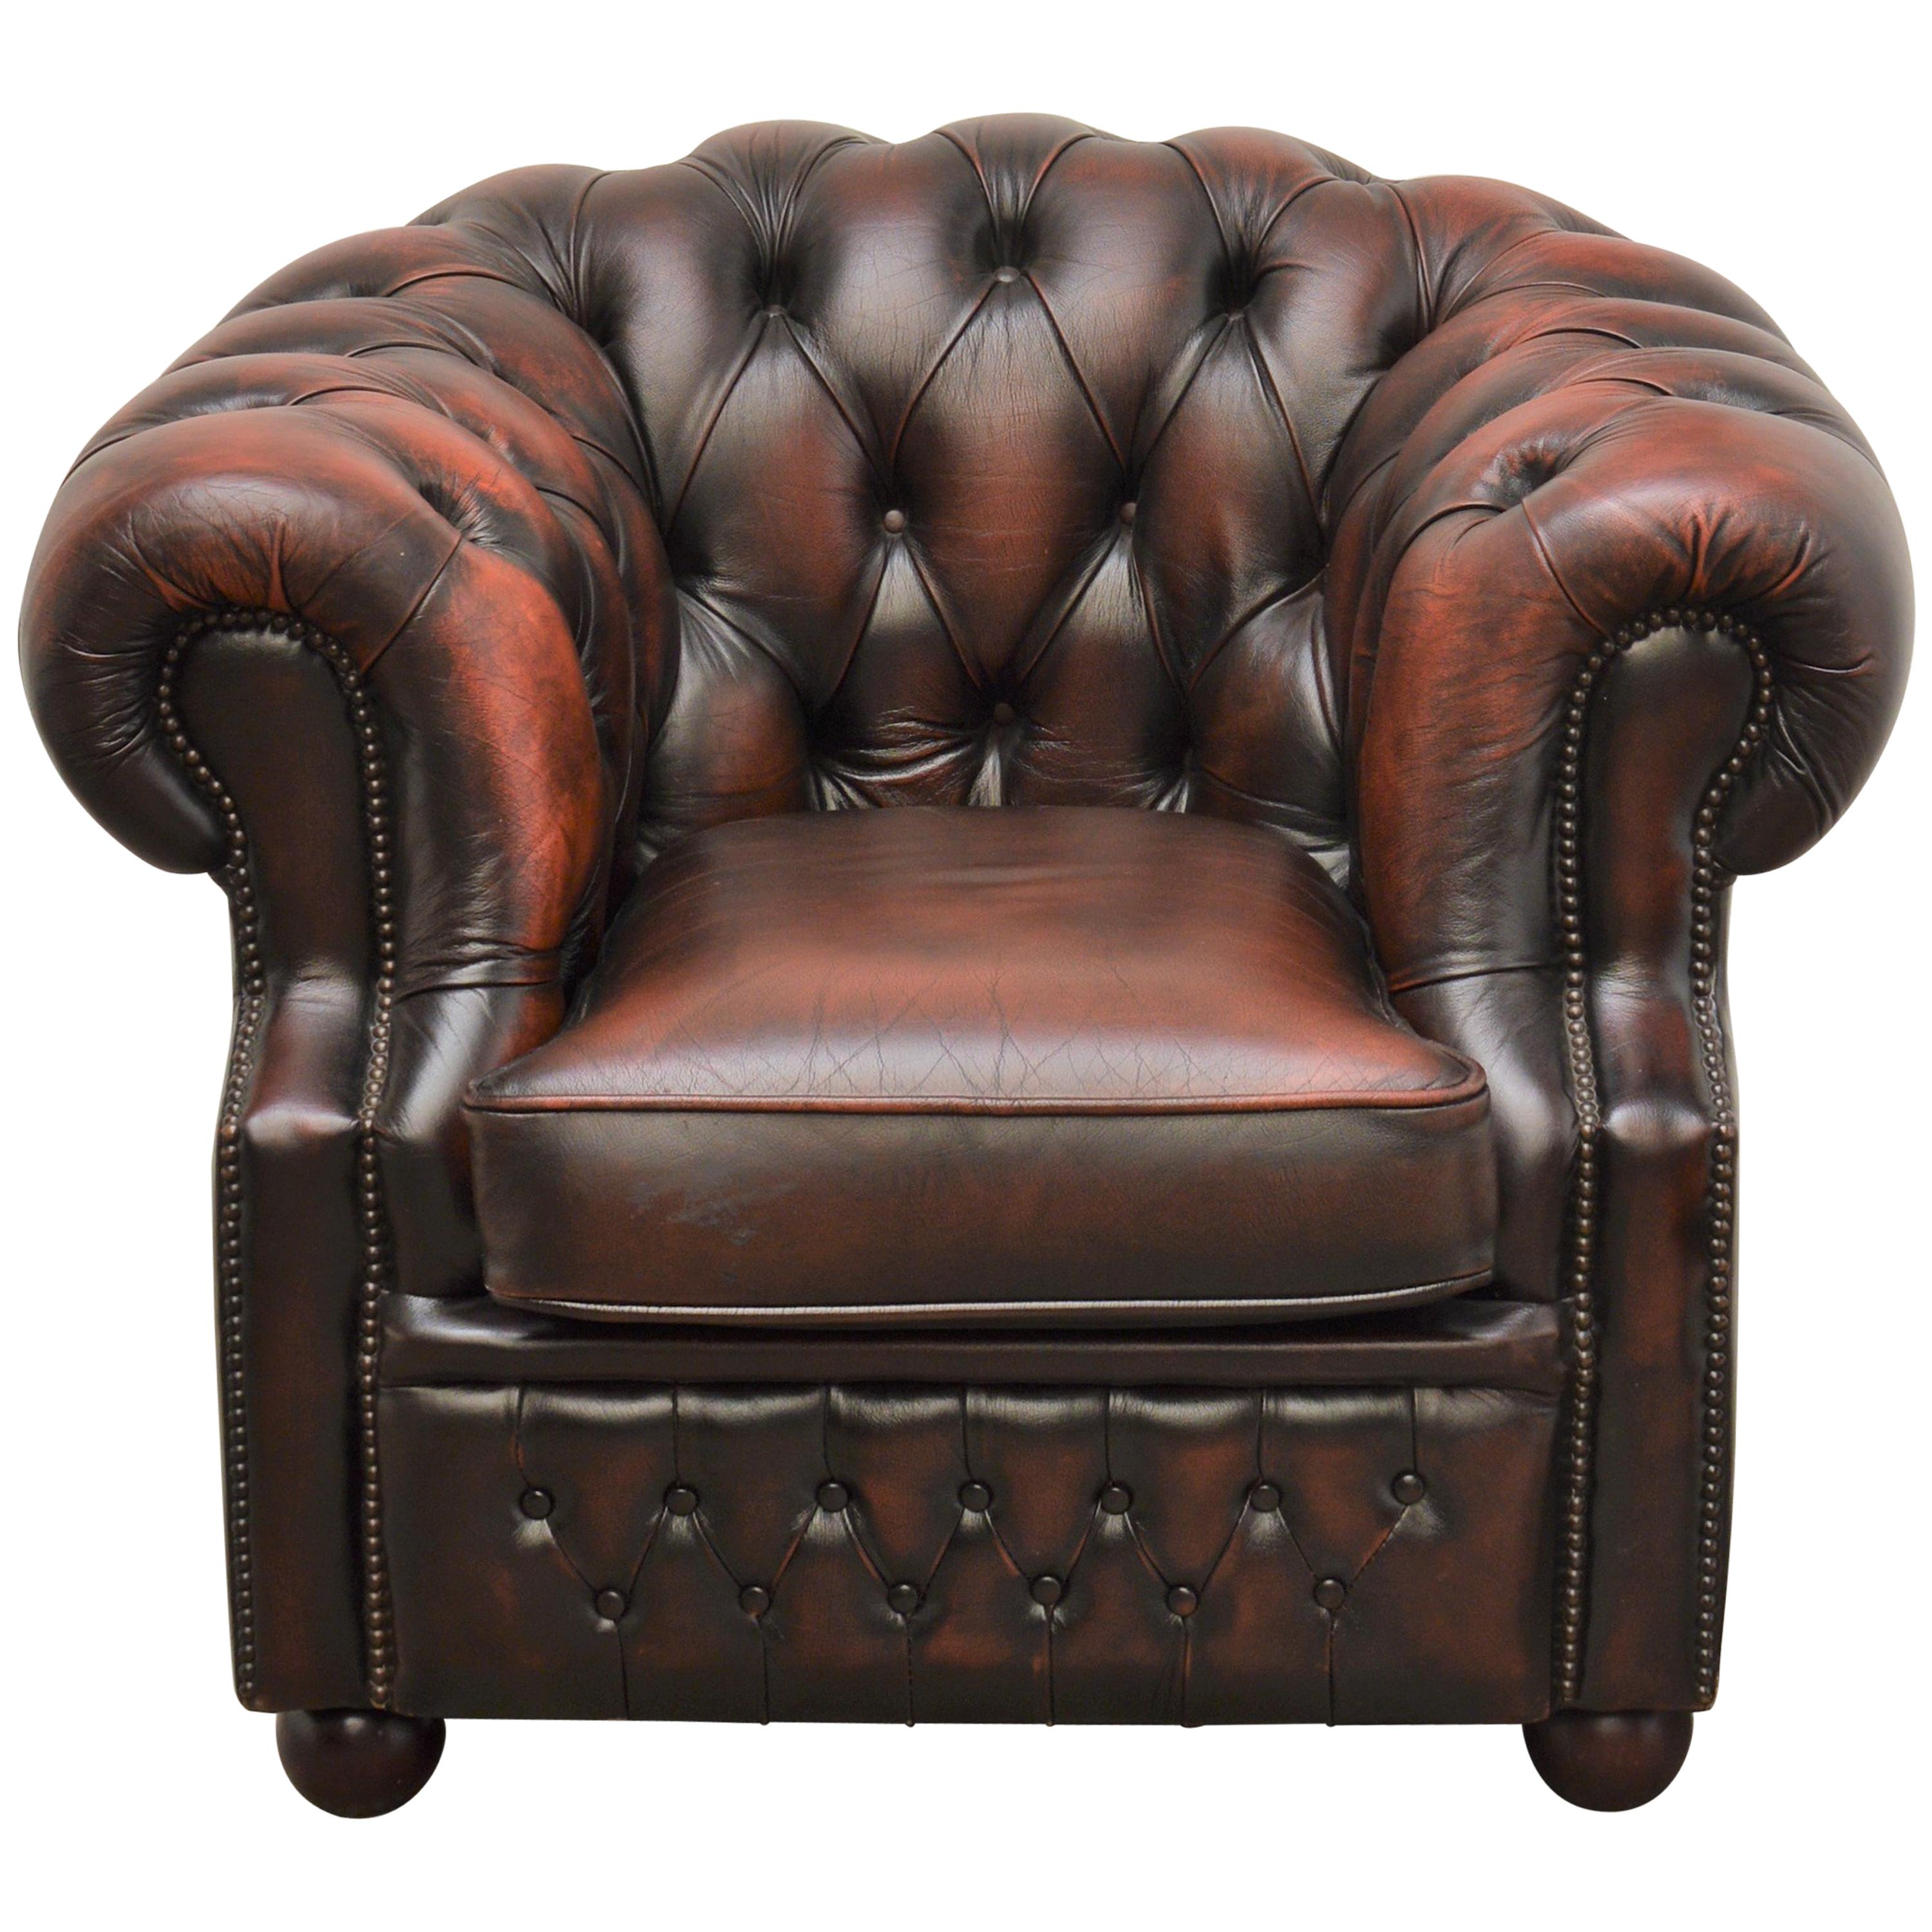 Delta Chesterfield Lowback Chair Mayfair, 1992 For Sale